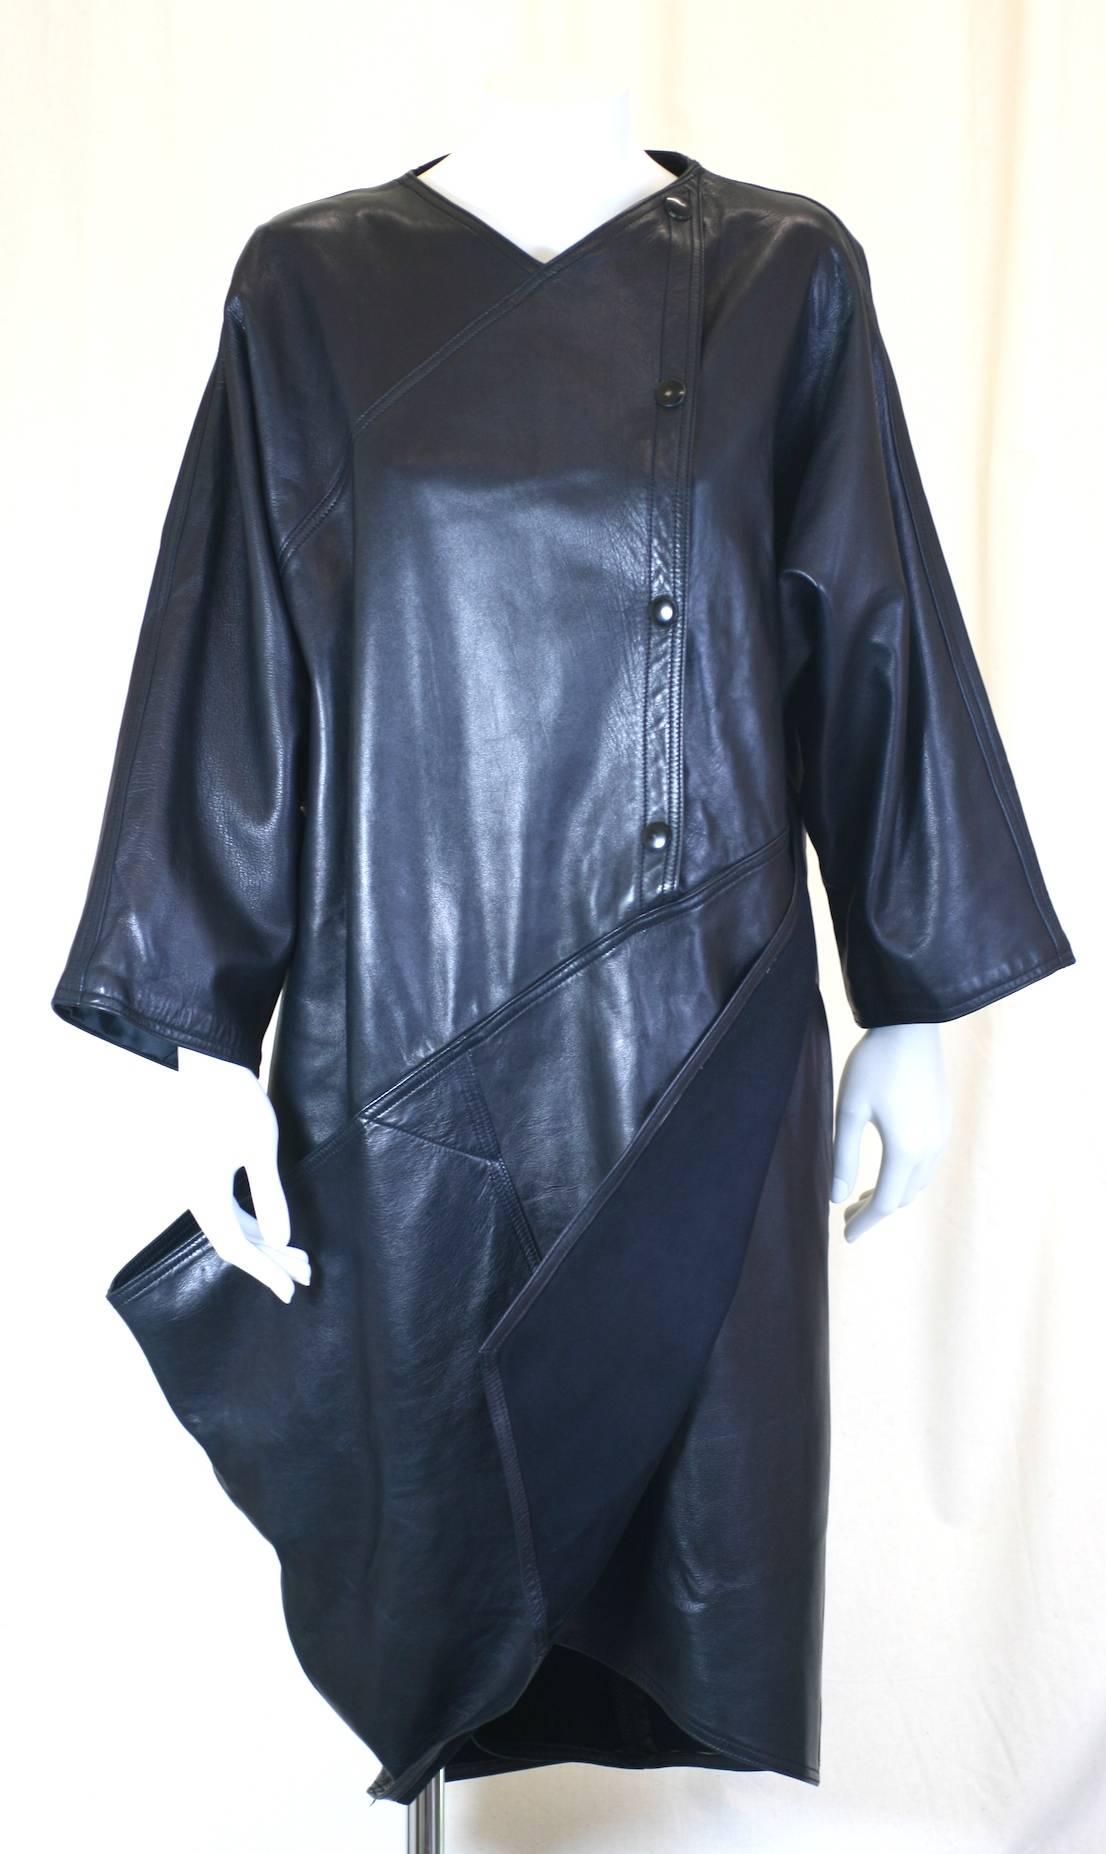 Anne Marie Beretta Sculptural Leather Dress crafted in the softest, deep navy eggplant leather. 
Parisian designer, Beretta treated her designs as 